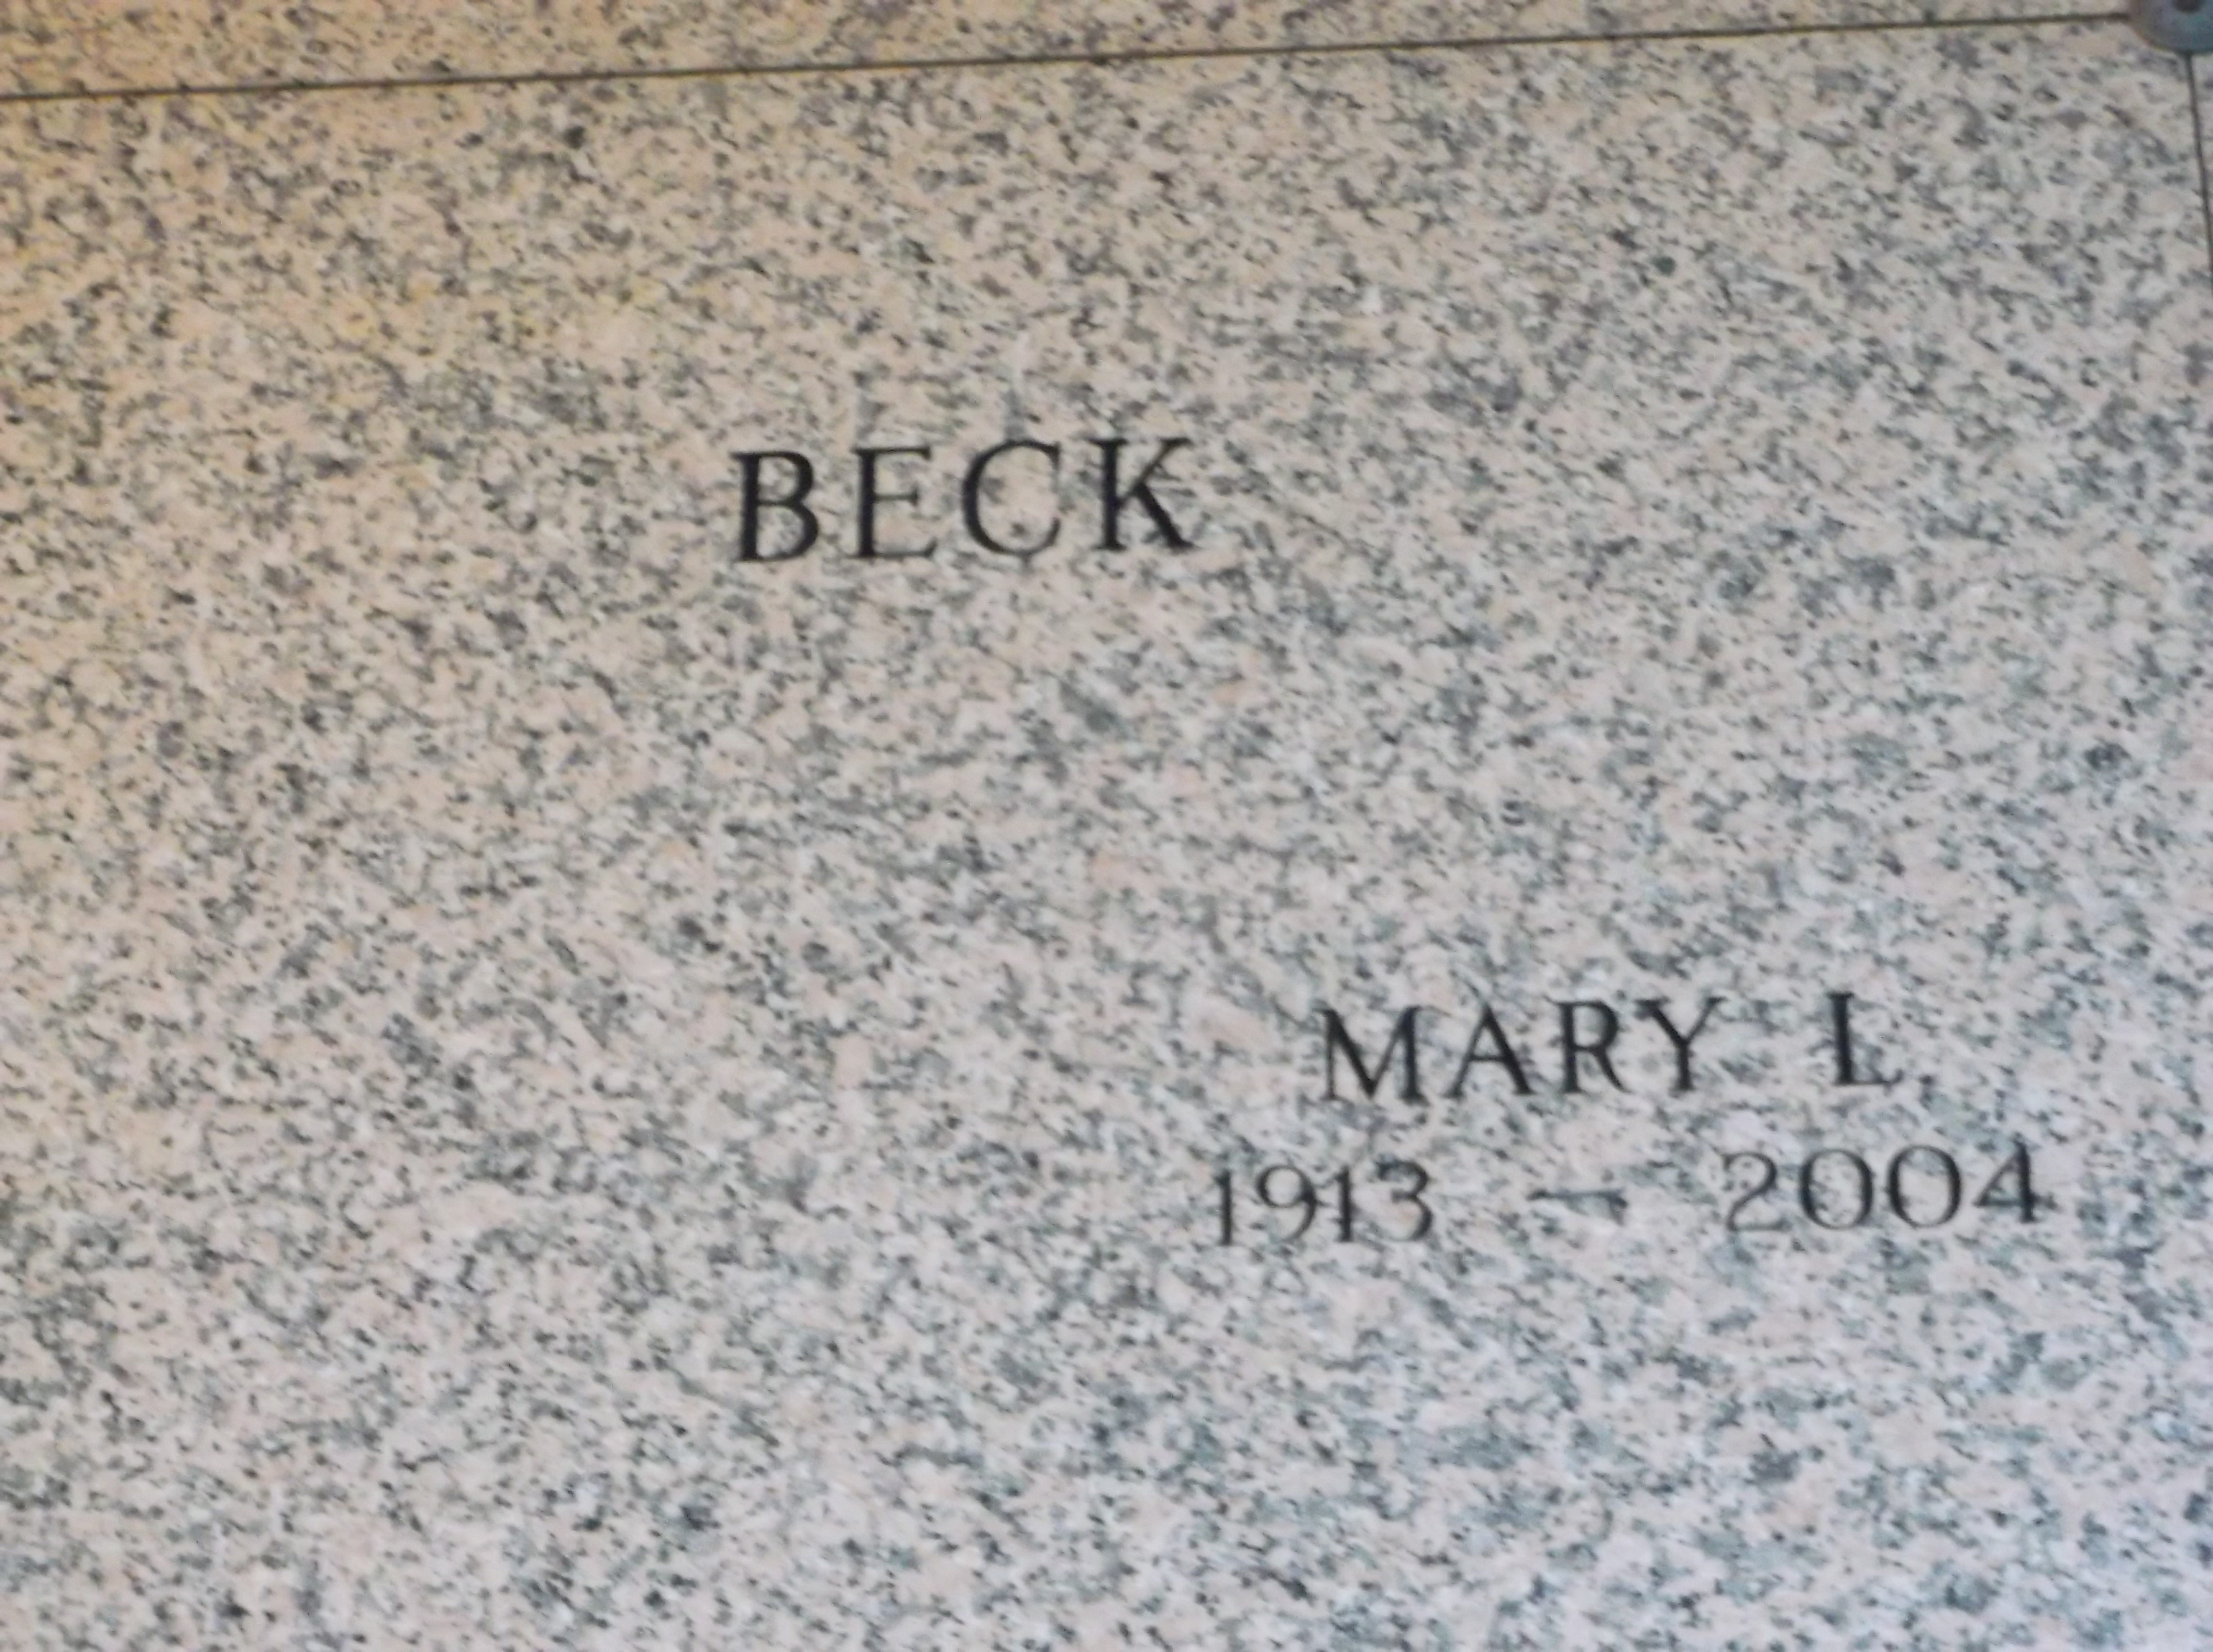 Mary L Beck